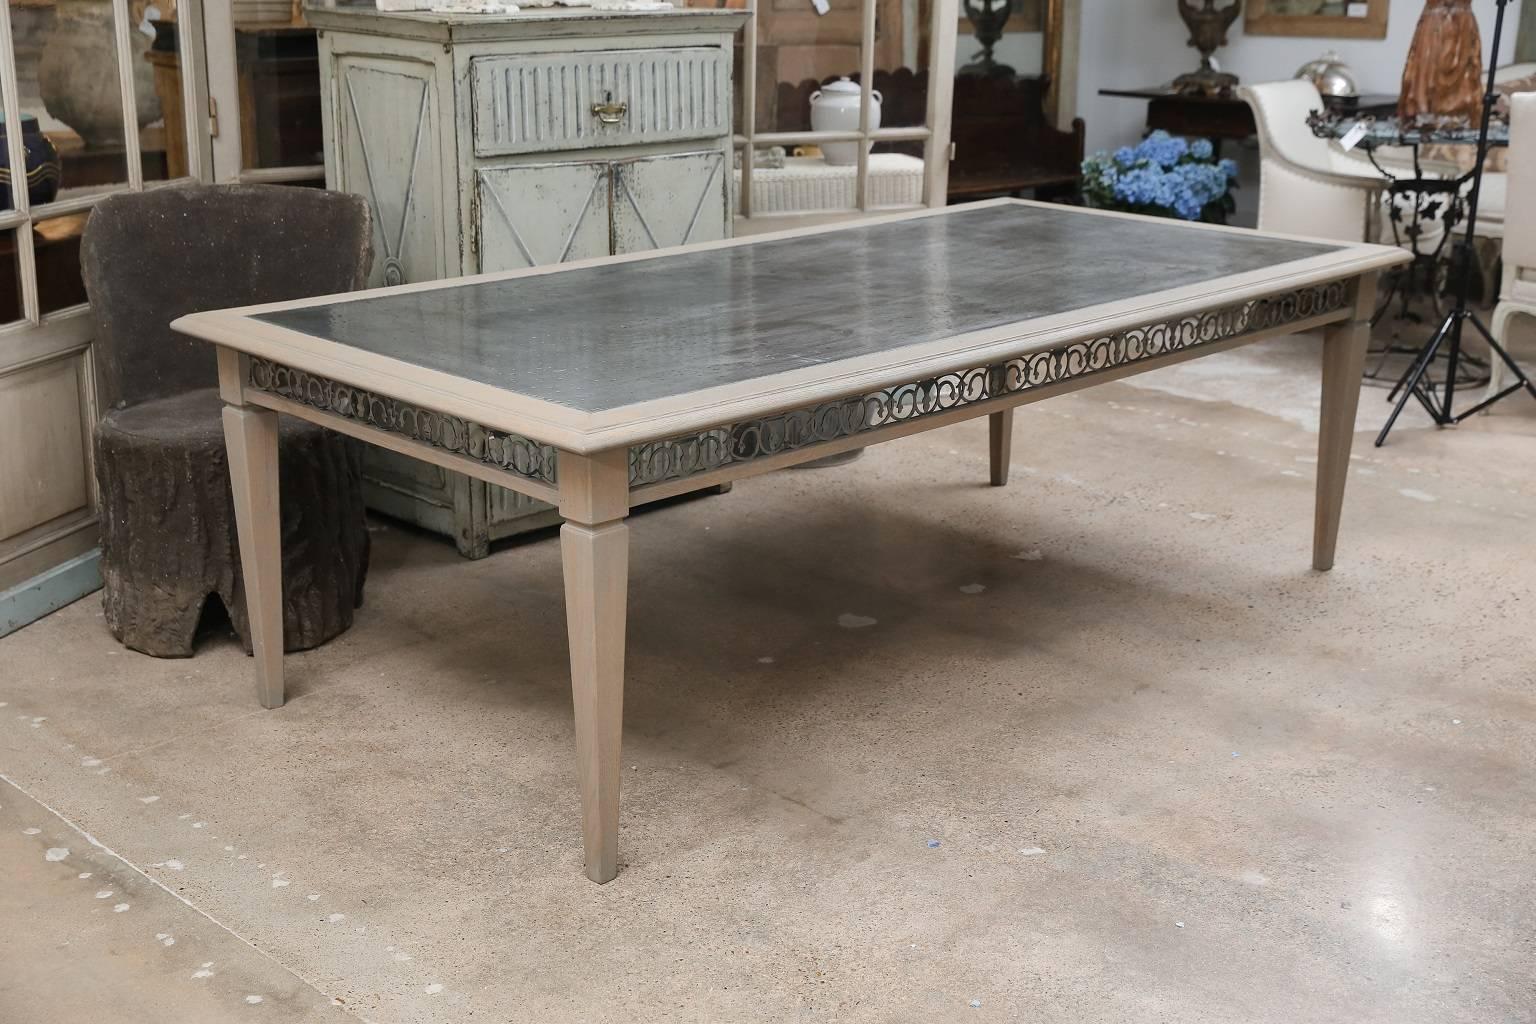 Custom carved dining table from French white oak with four tapered legs, a zinc-alloy top and a decorative metal apron reticulated in a scrolled motif. The oak surfaces and metal apron both are finished with a subtle semi-transparent gray wash.